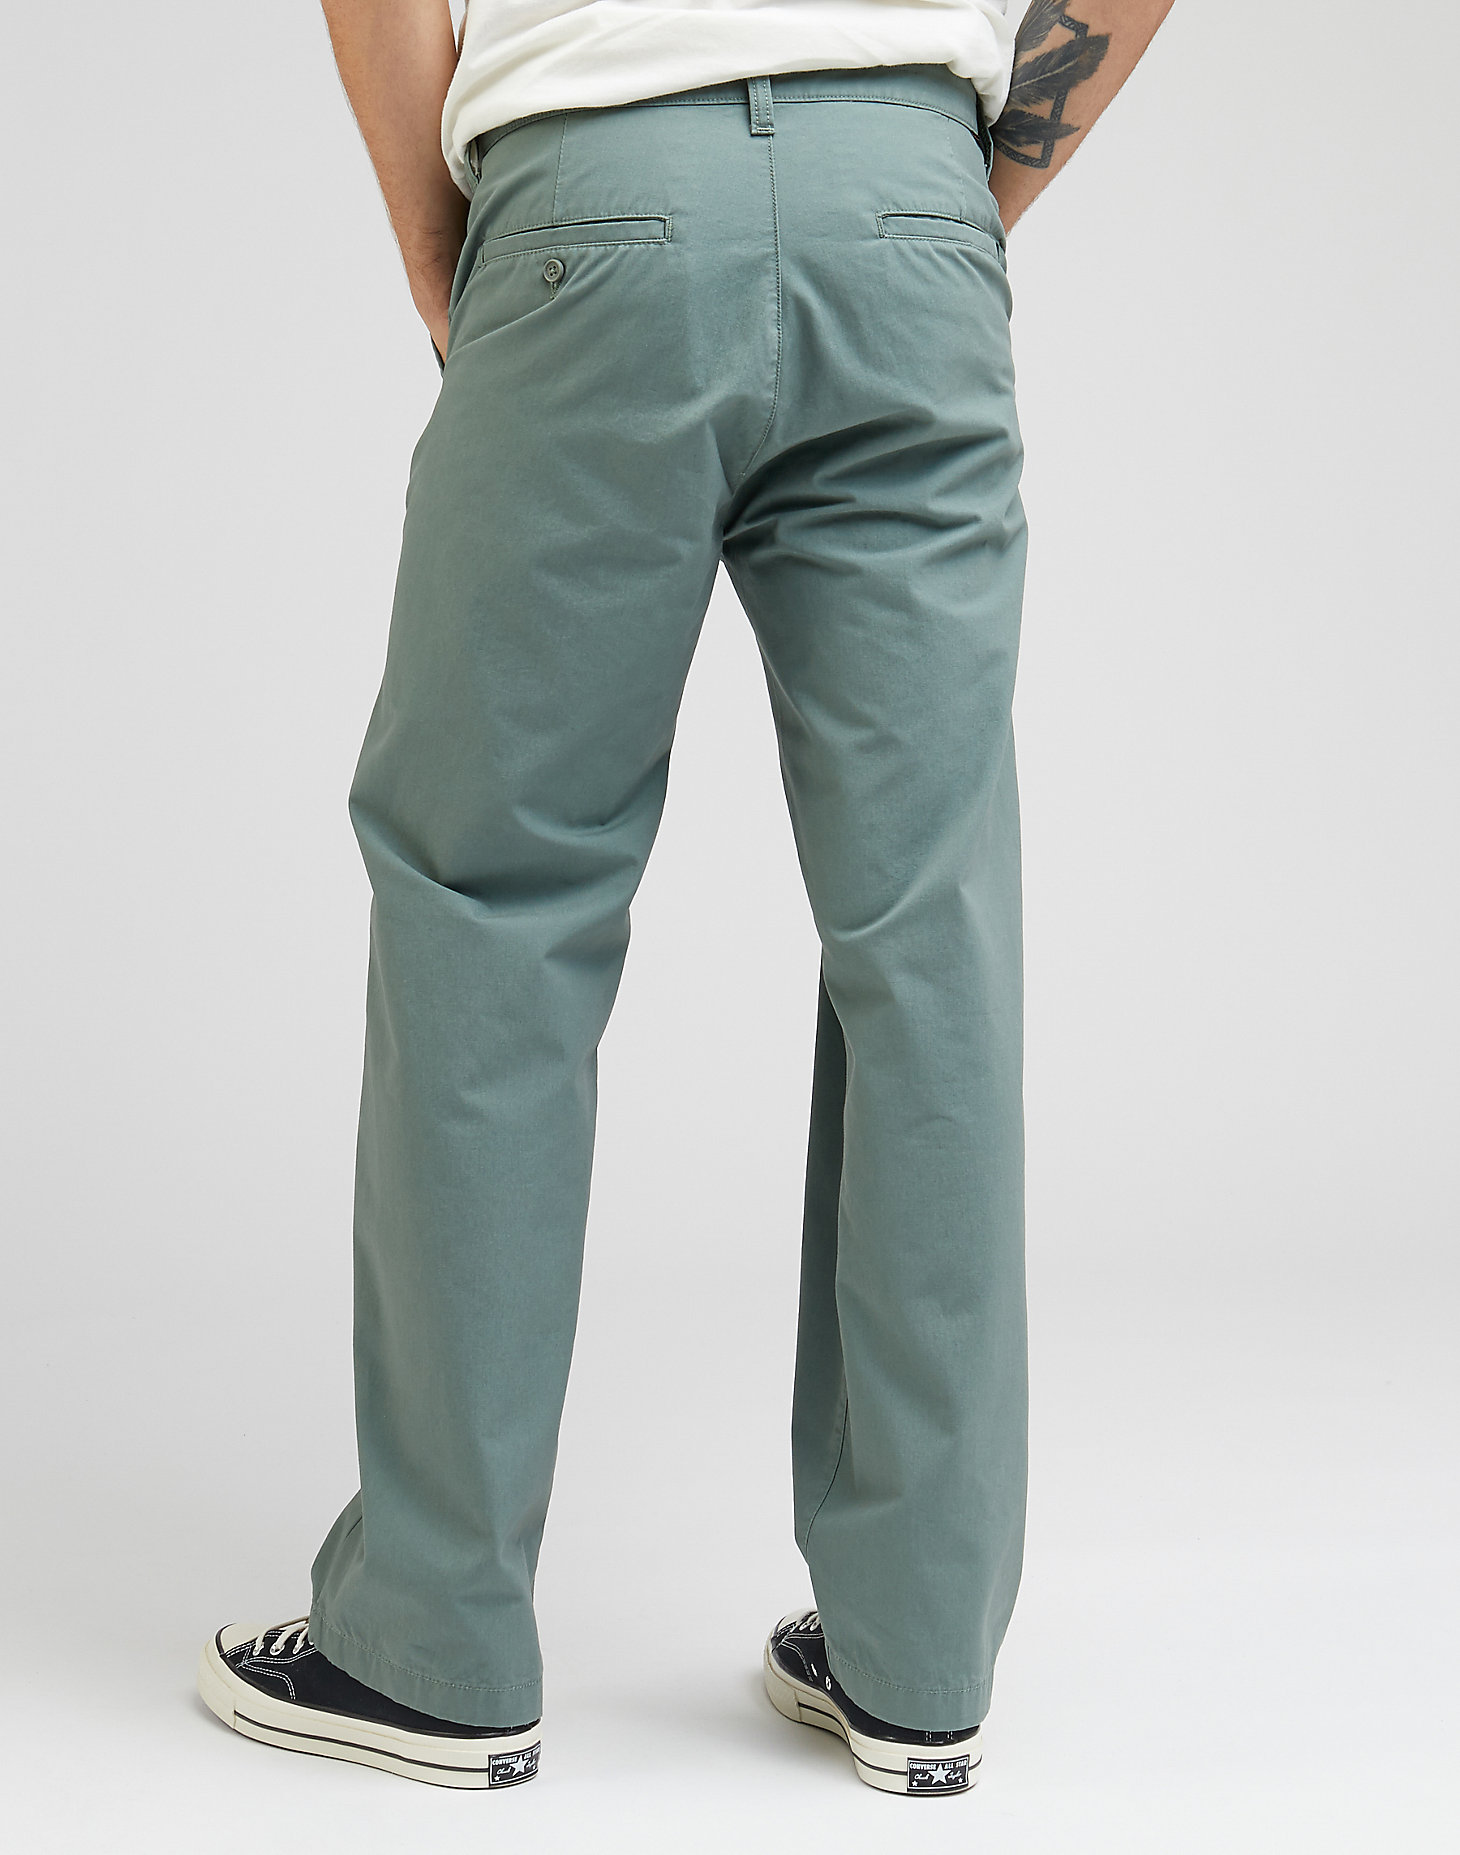 Loose Chino in Fort Green alternative view 1